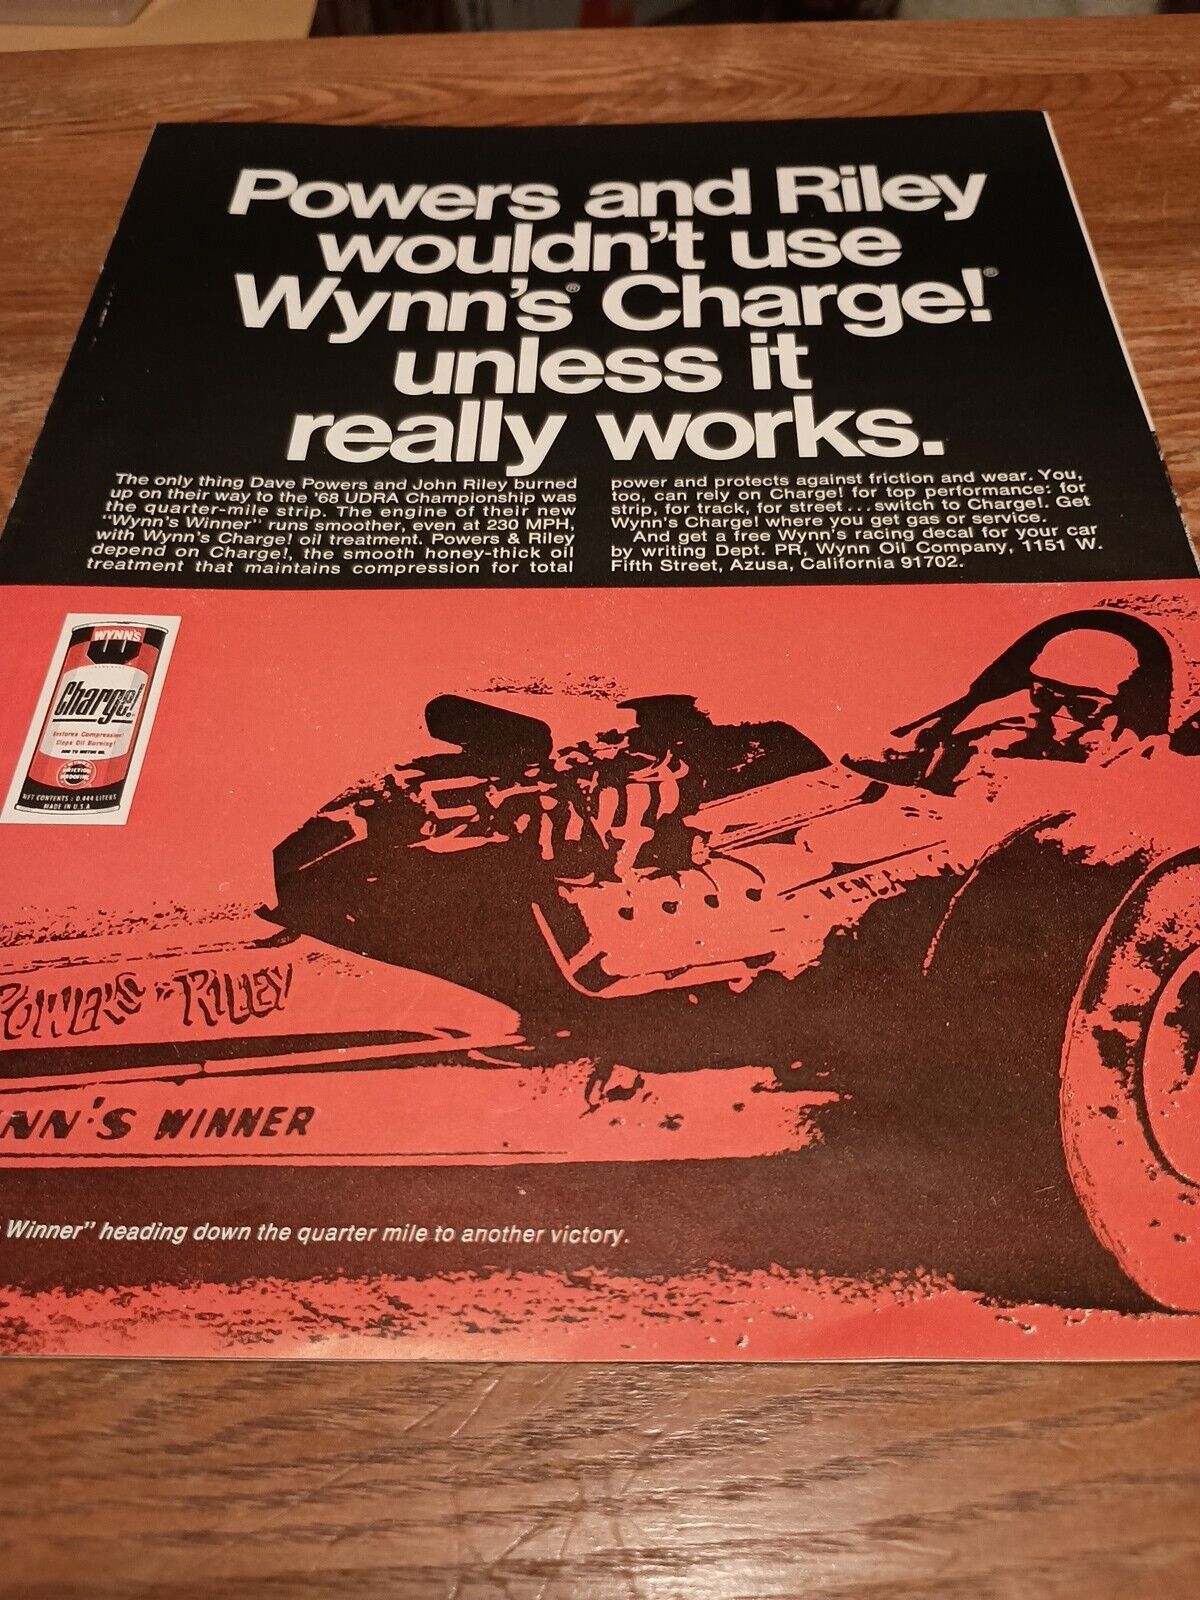 1969 Wynn\'s Charge Really Works Magazine Ad